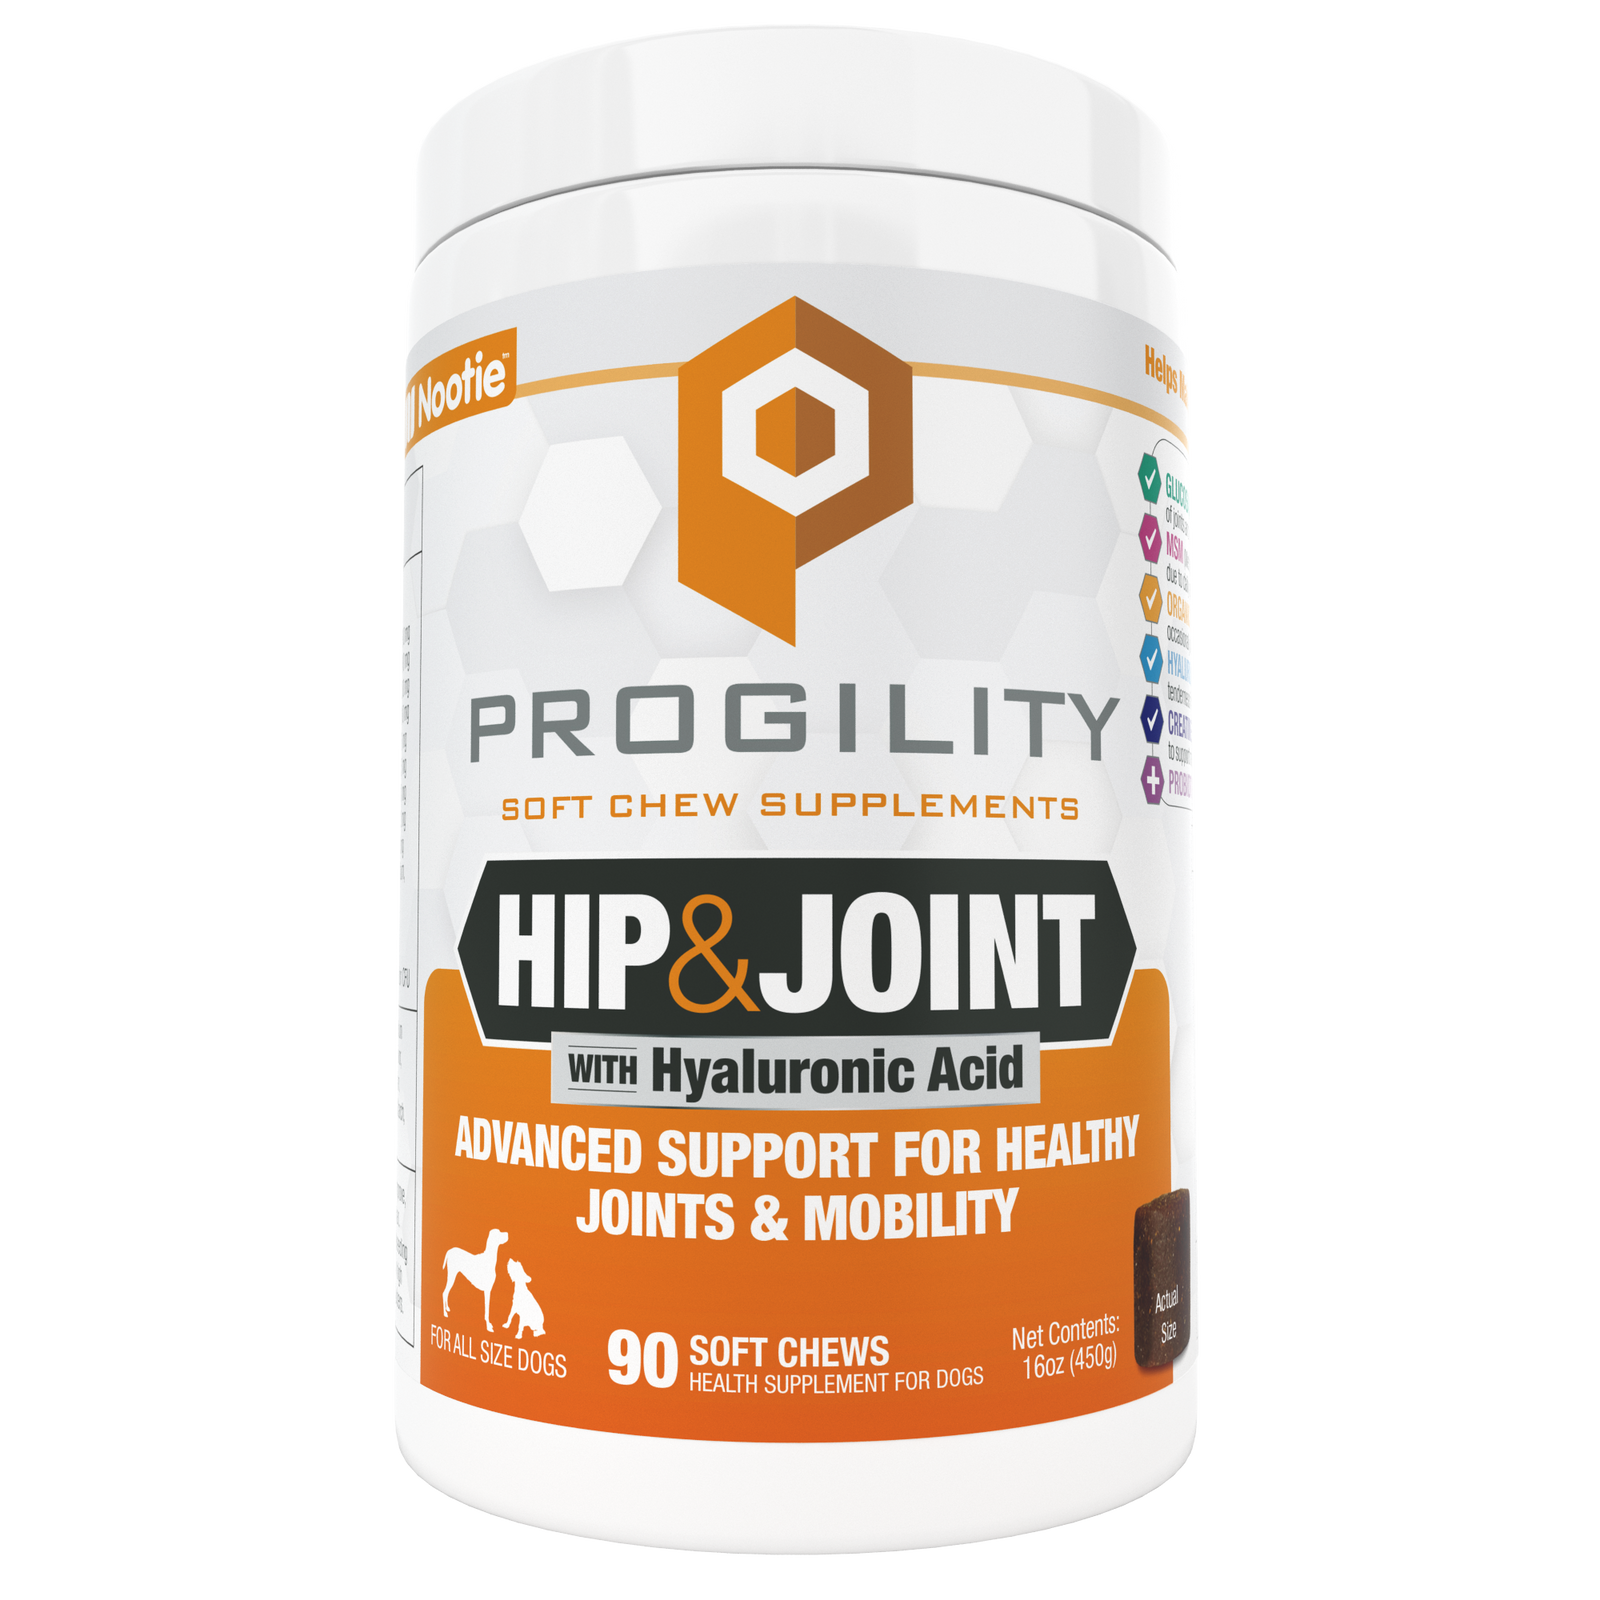 Progility Hip & Joint Soft Chew Supplement For Dogs |Helps Maintain Healthy Joint Mobility & Function